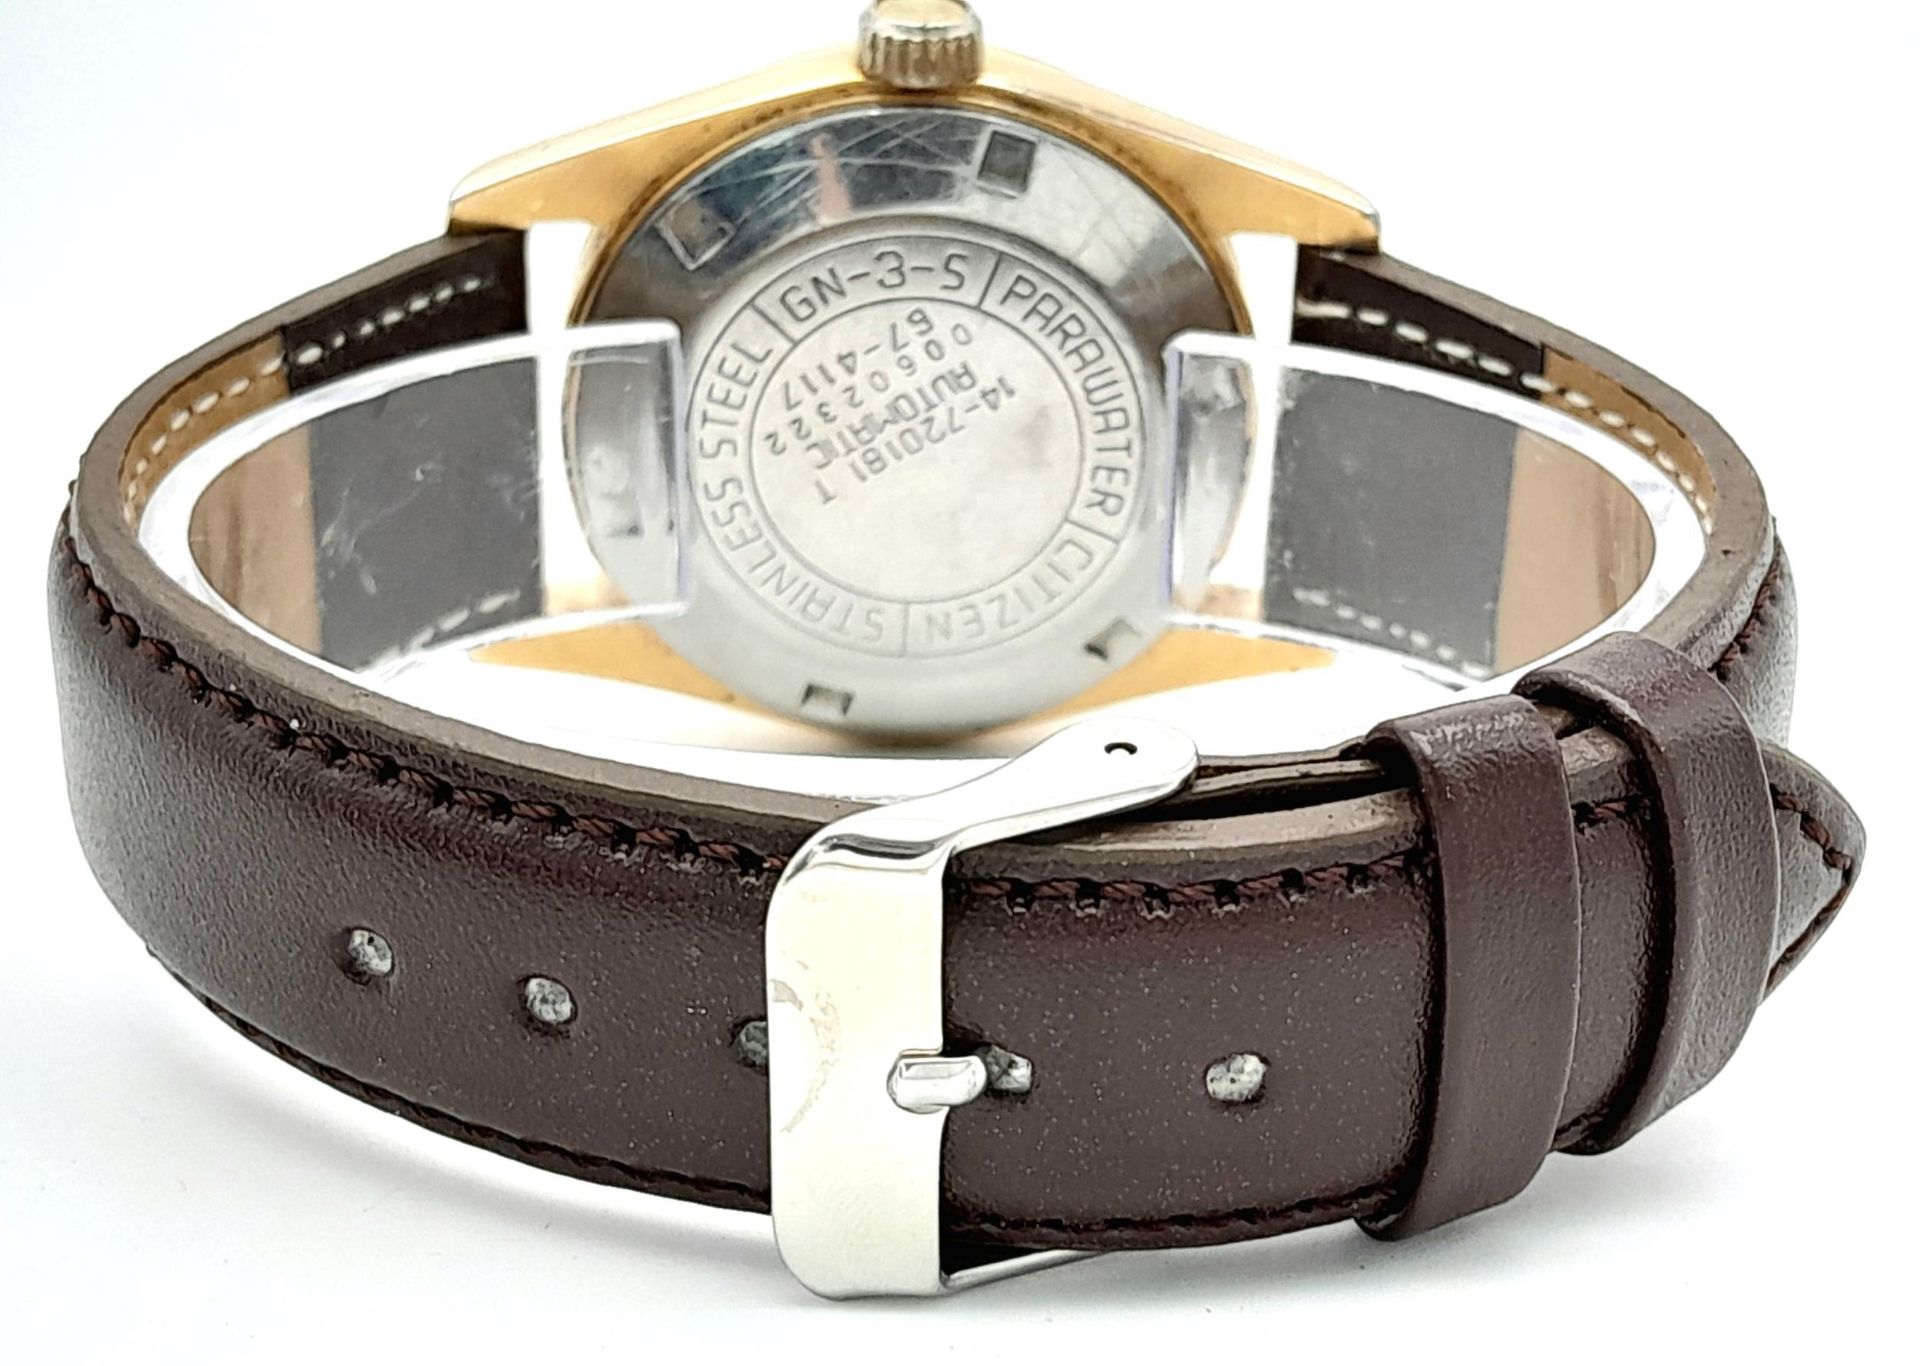 A Citizen Automatic Stone Set Watch. Brown leather strap. Gold plated case - 36mm. Gold tone dial - Image 4 of 6